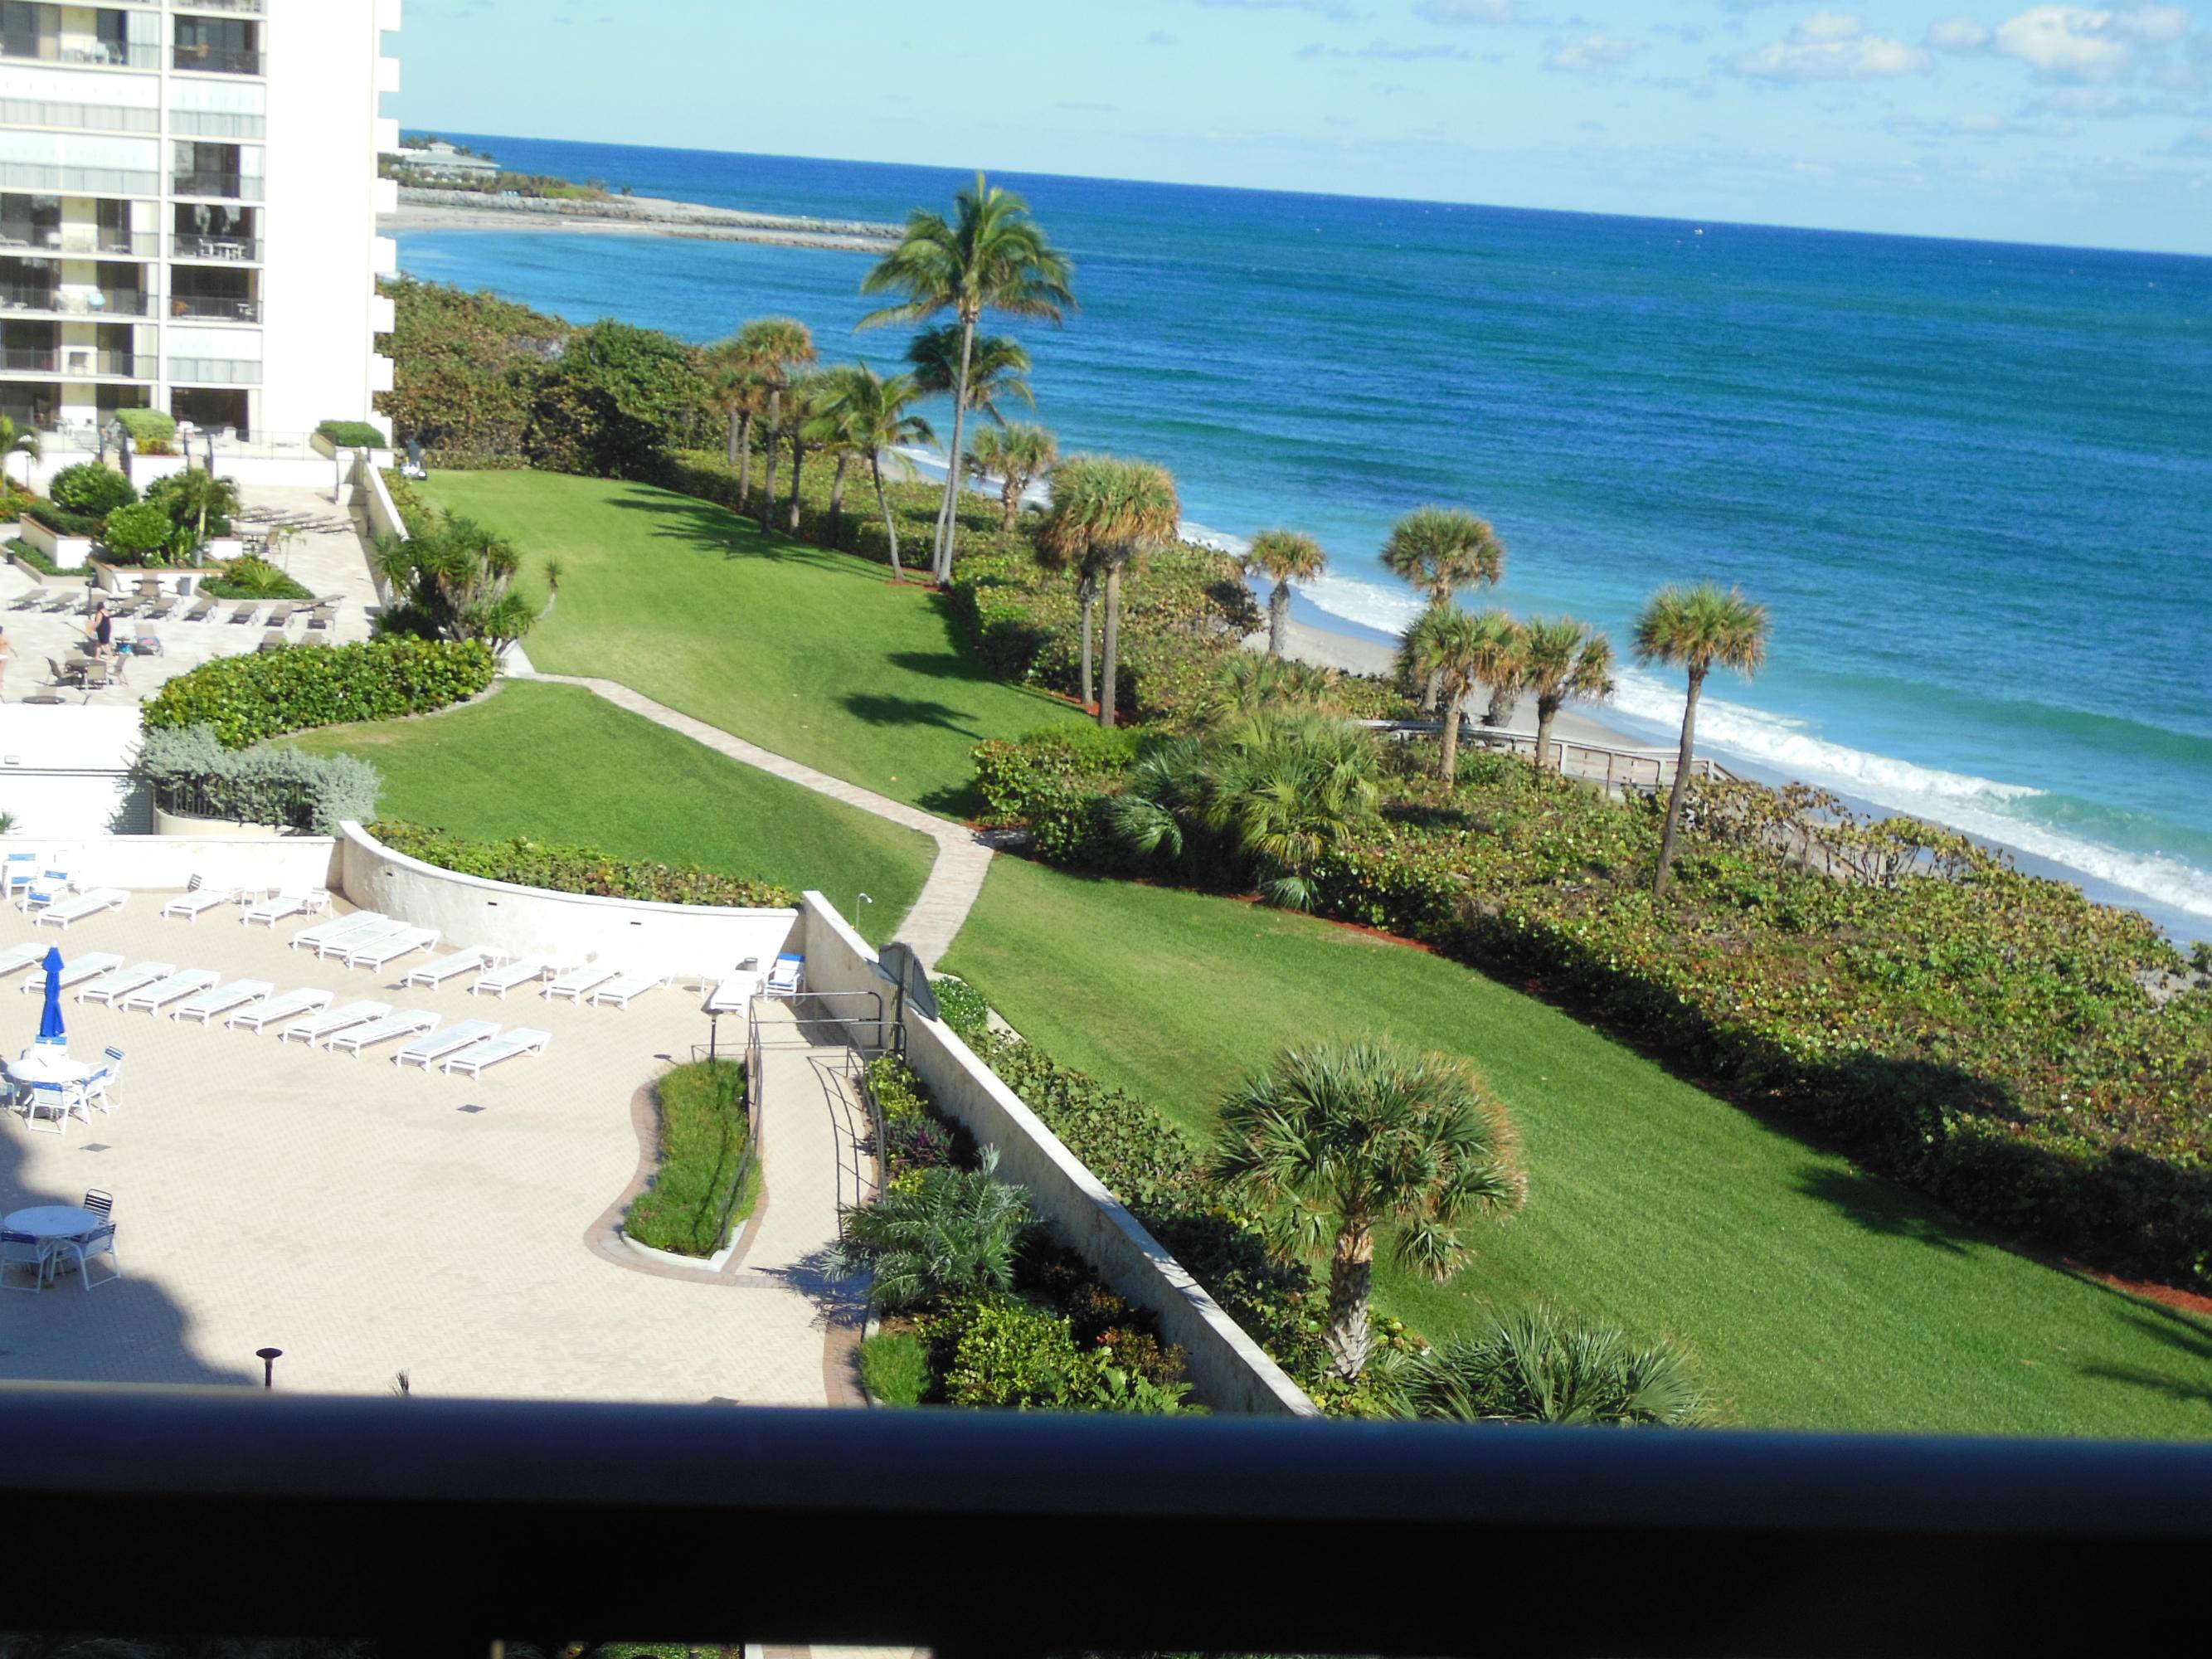 Awesome Oceanfront Building with breathtaking views of the Blue Ocean and Inlet activity !